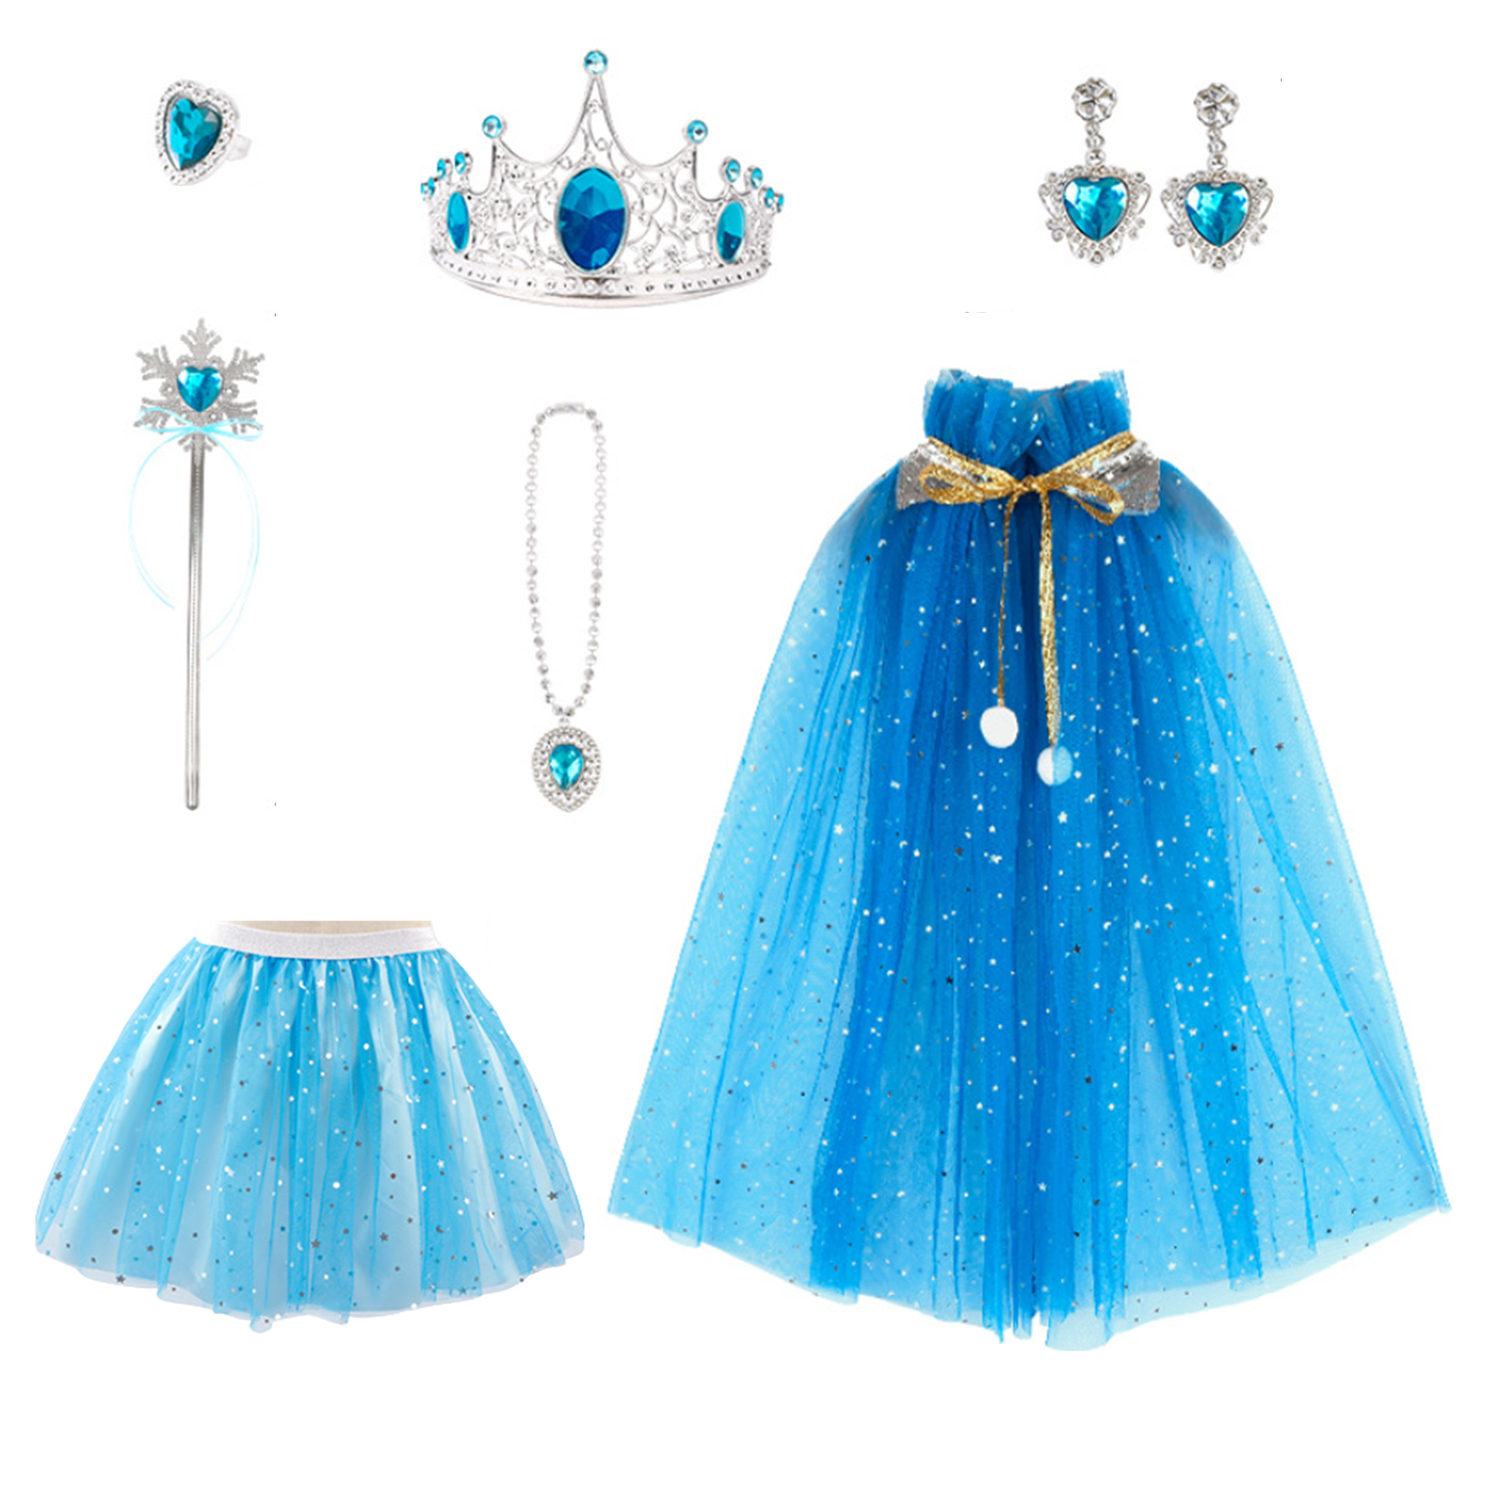 AOXTOY Dress-up Cosplay Toys for Girls, Princess Dress Up Clothes Cape Skirt Set, Pretend Play Princess Dress Cloak Jewelry Crown Wand - image 4 of 5